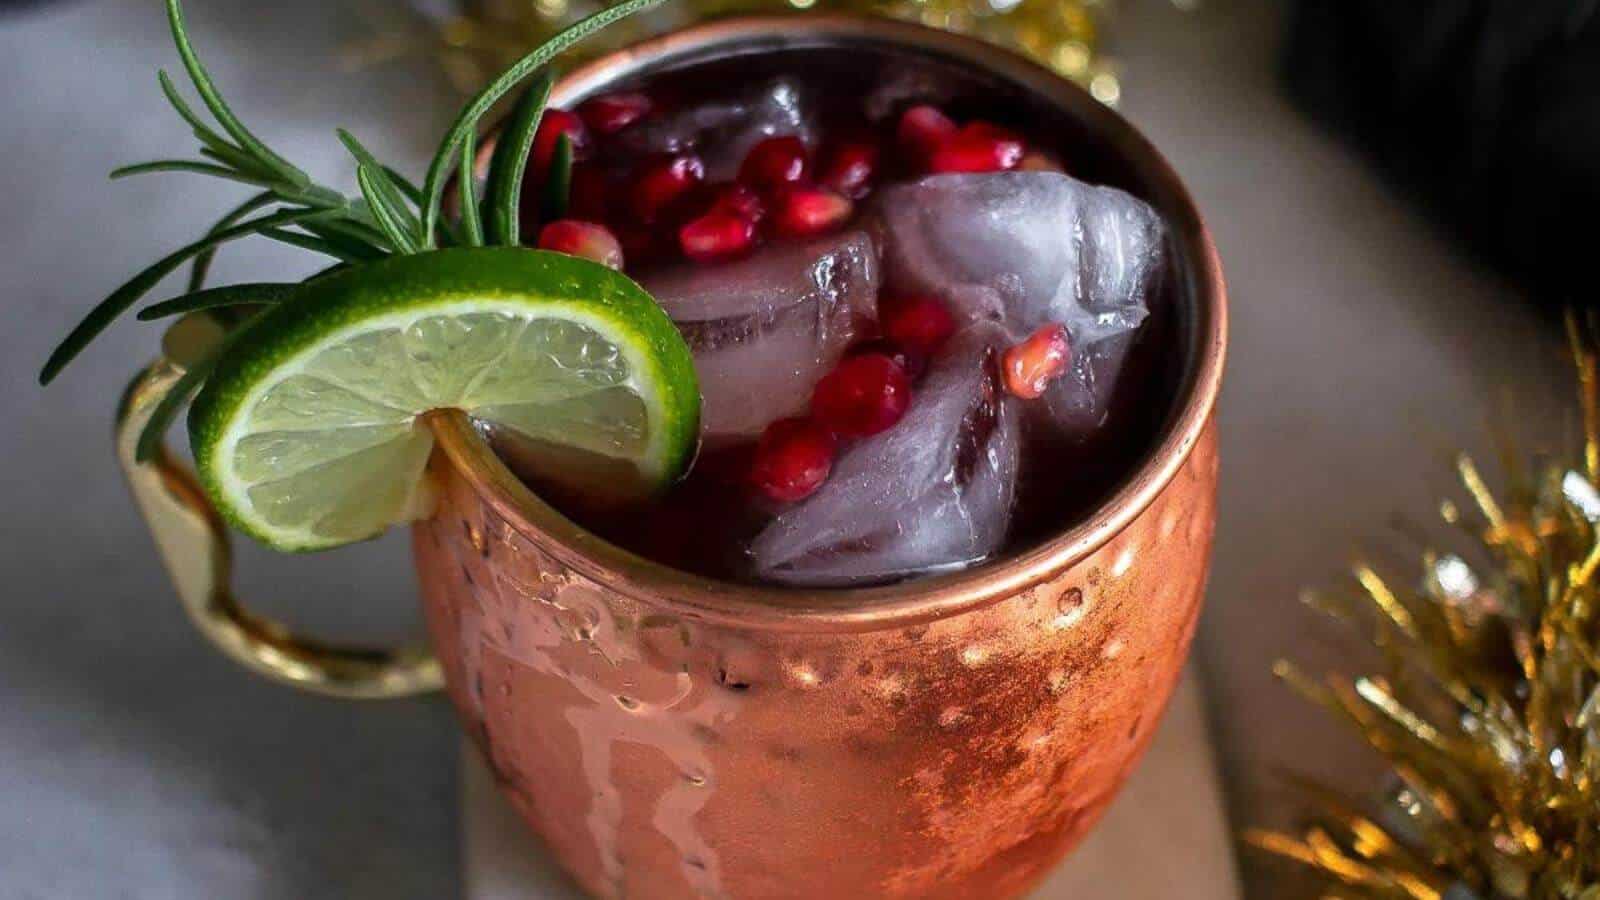 A pomegranate virgin moscow mule in a copper mug with lime wedge, ice and cranberries.